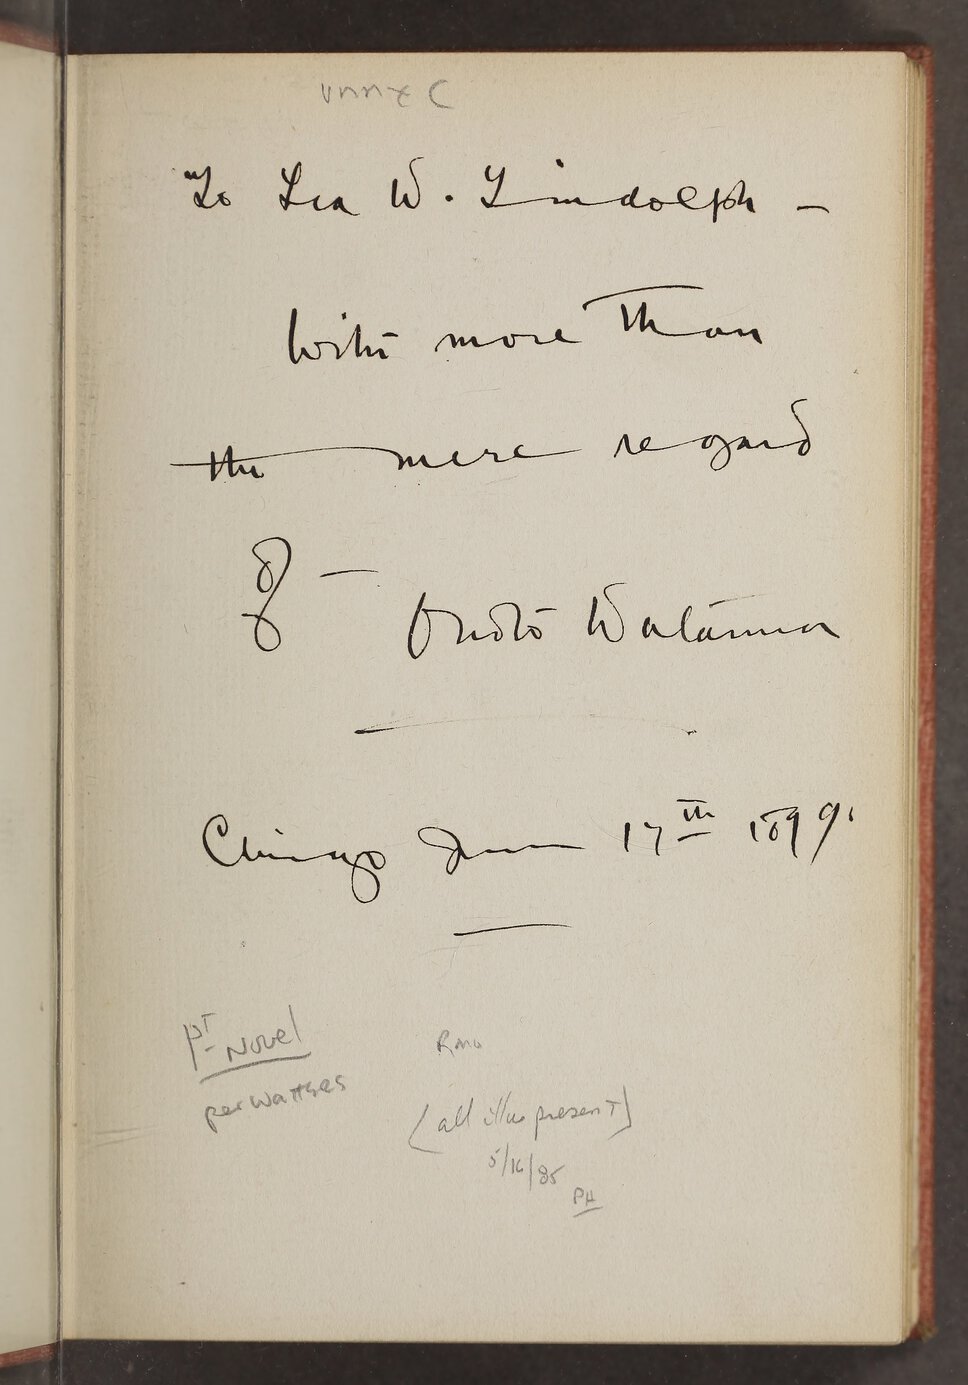 Page inscribed by Onoto Watanna to Lea W. Lindolph and dated “Chicago June 17 1899.”